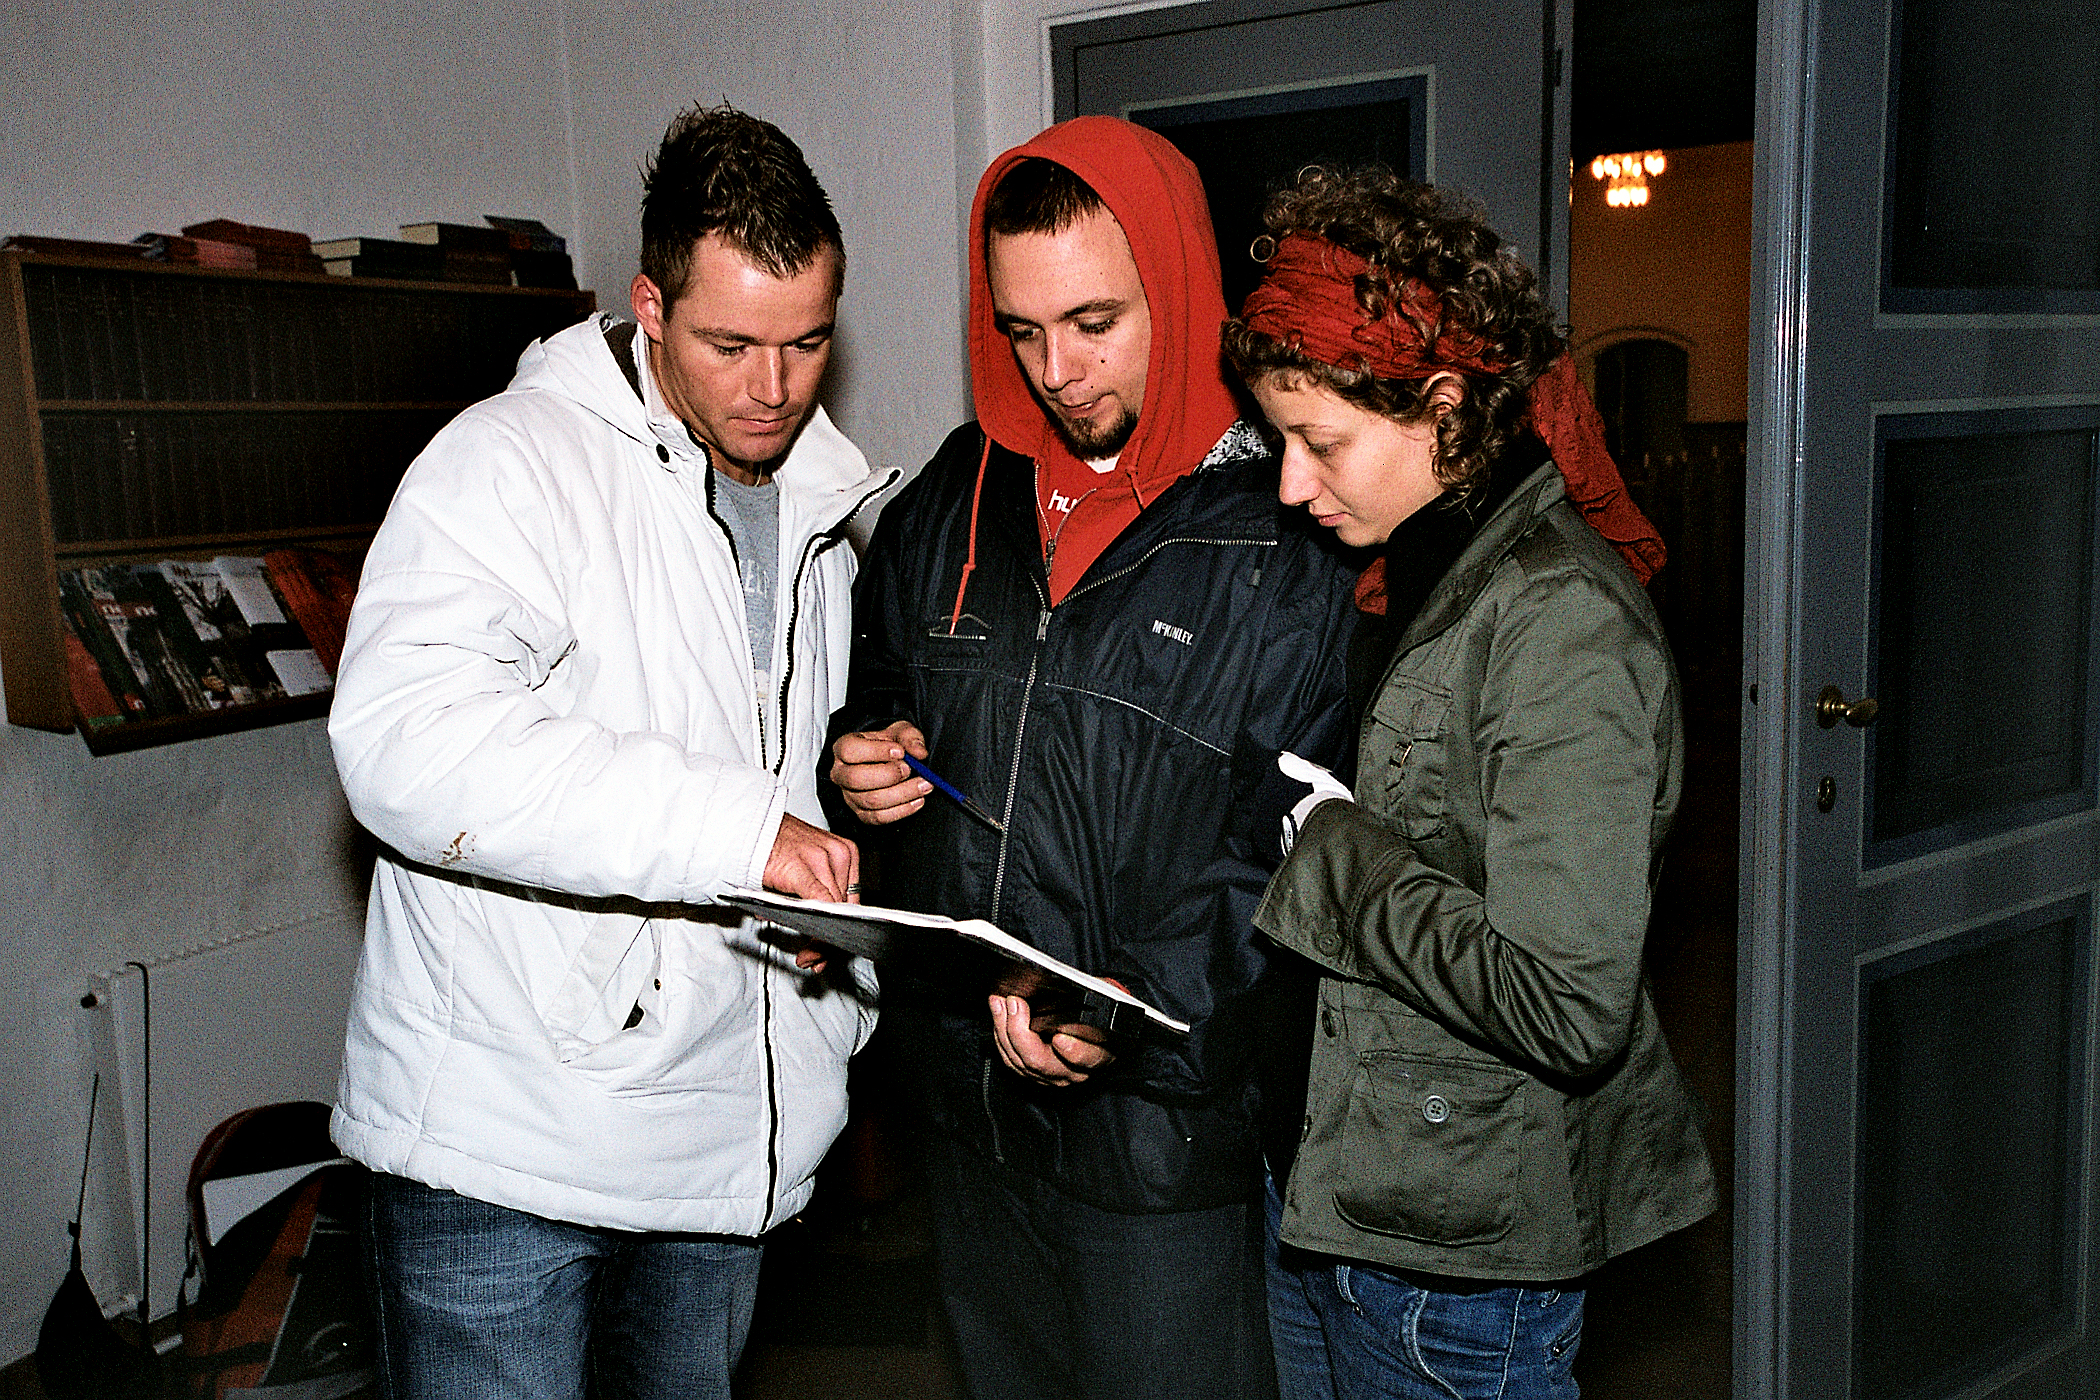 Anders Helde with 1st AD and cinematographer on the set of 'Kirken' 2006.